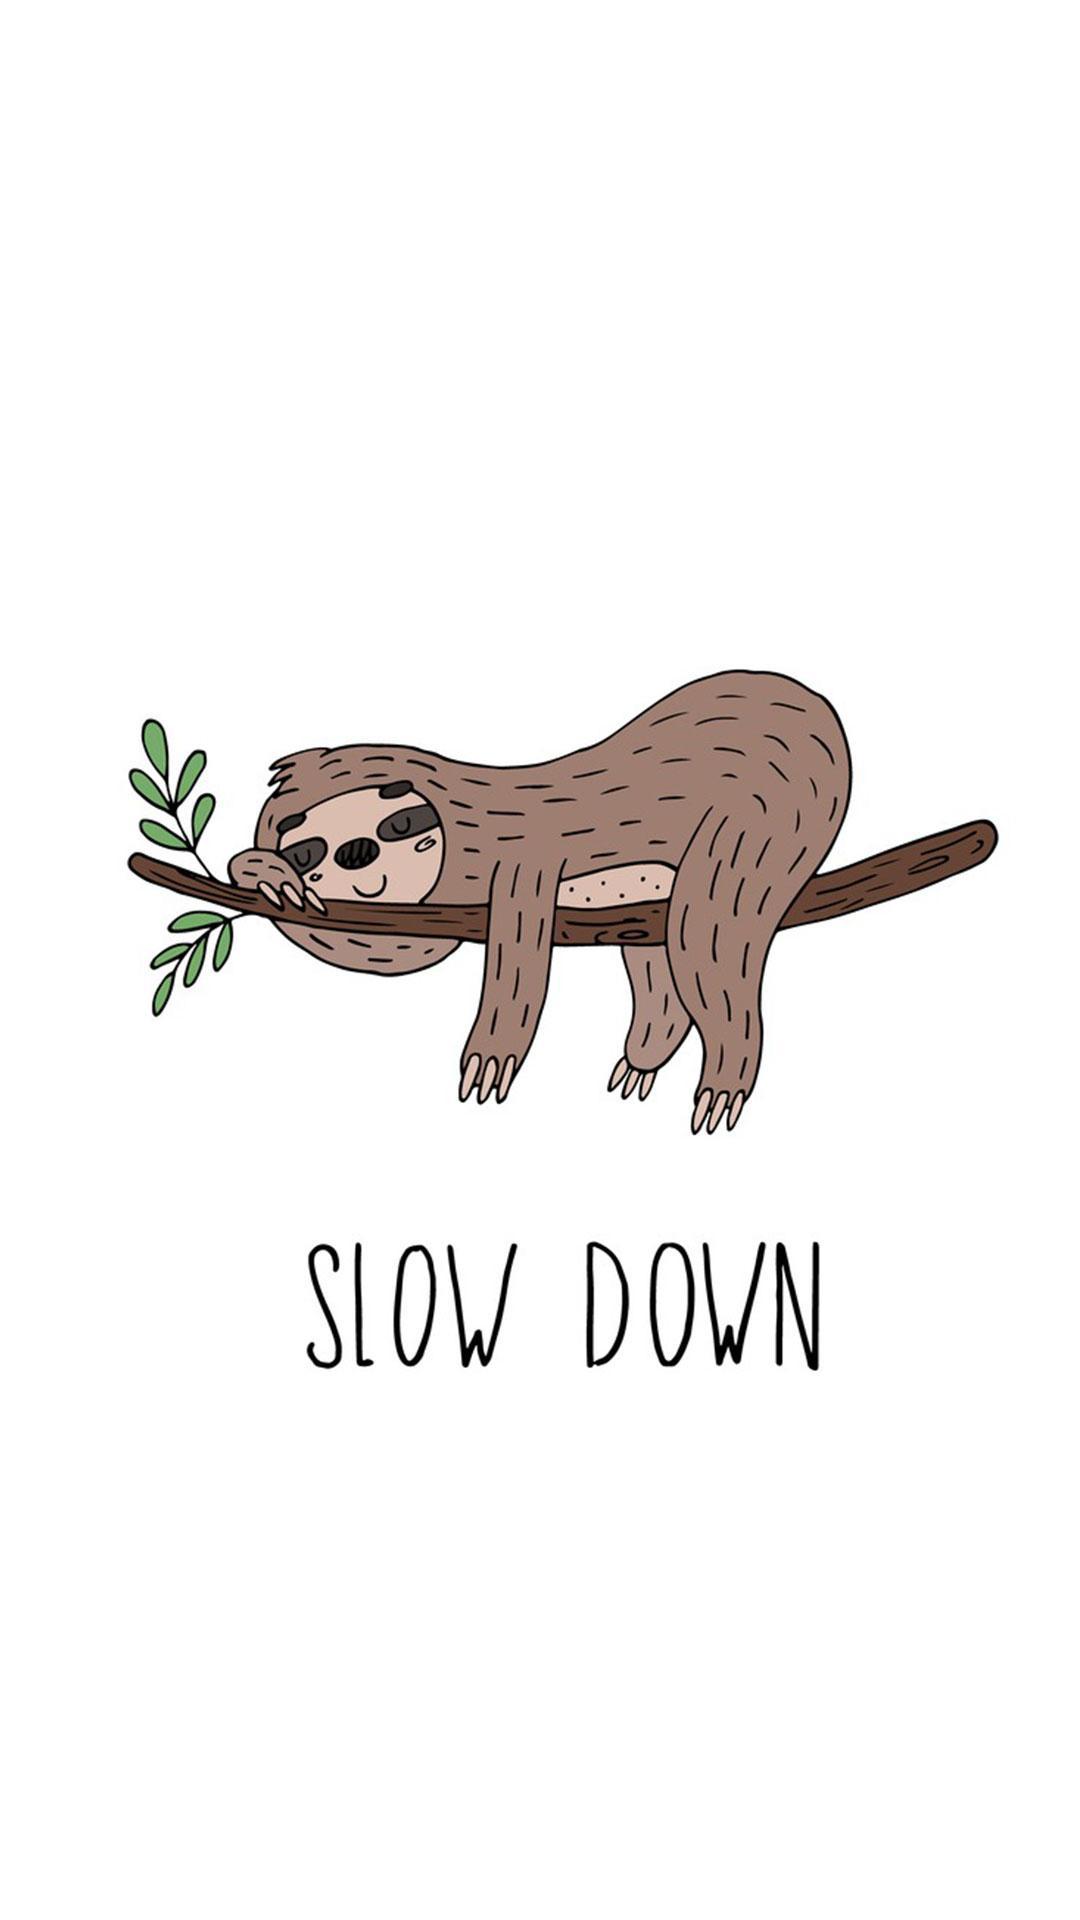 Cute Sloth Wallpapers for Android - APK Download